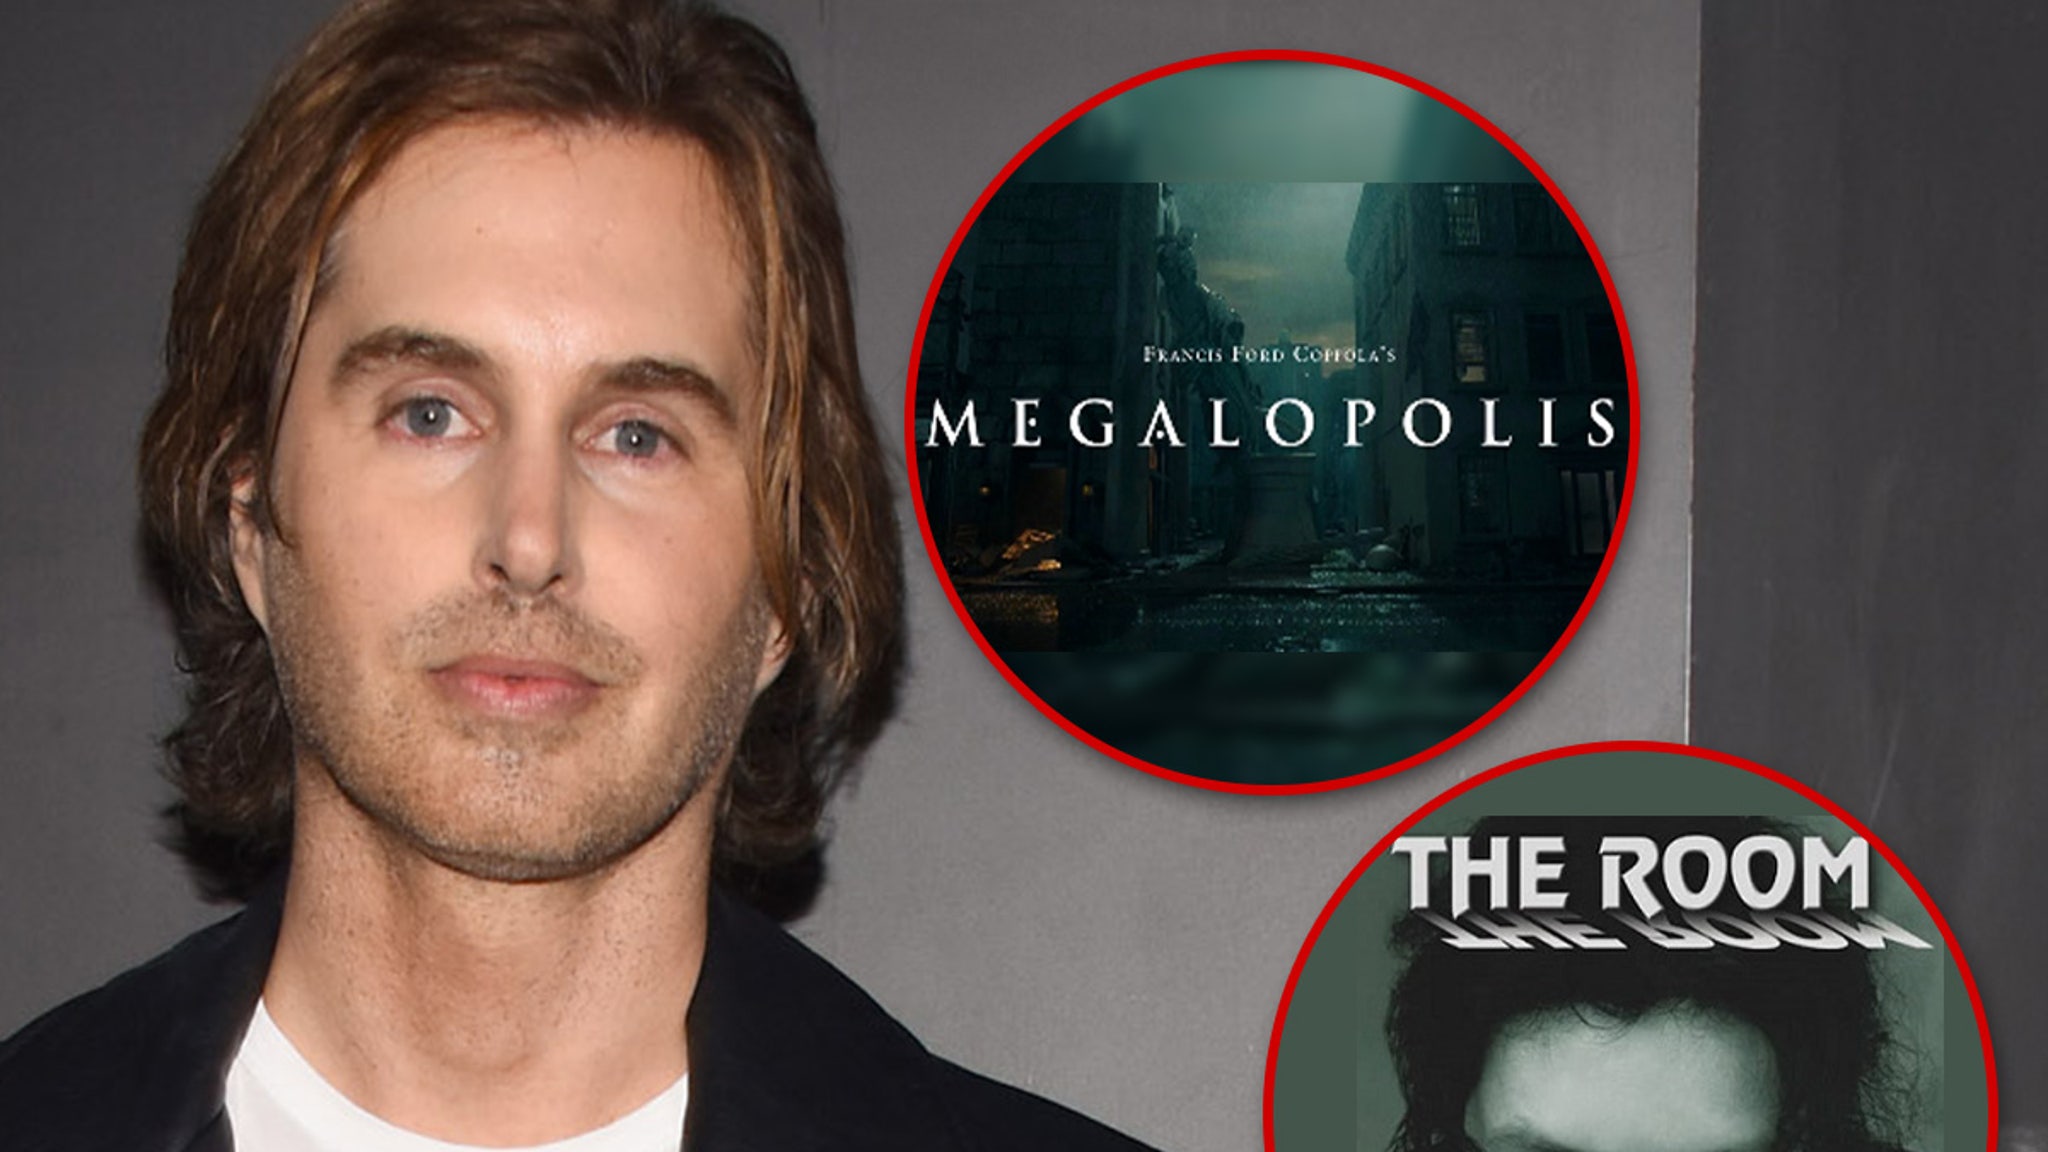 'The Room' Star Understands Comparisons to Coppola's Polarizing 'Megalopolis'